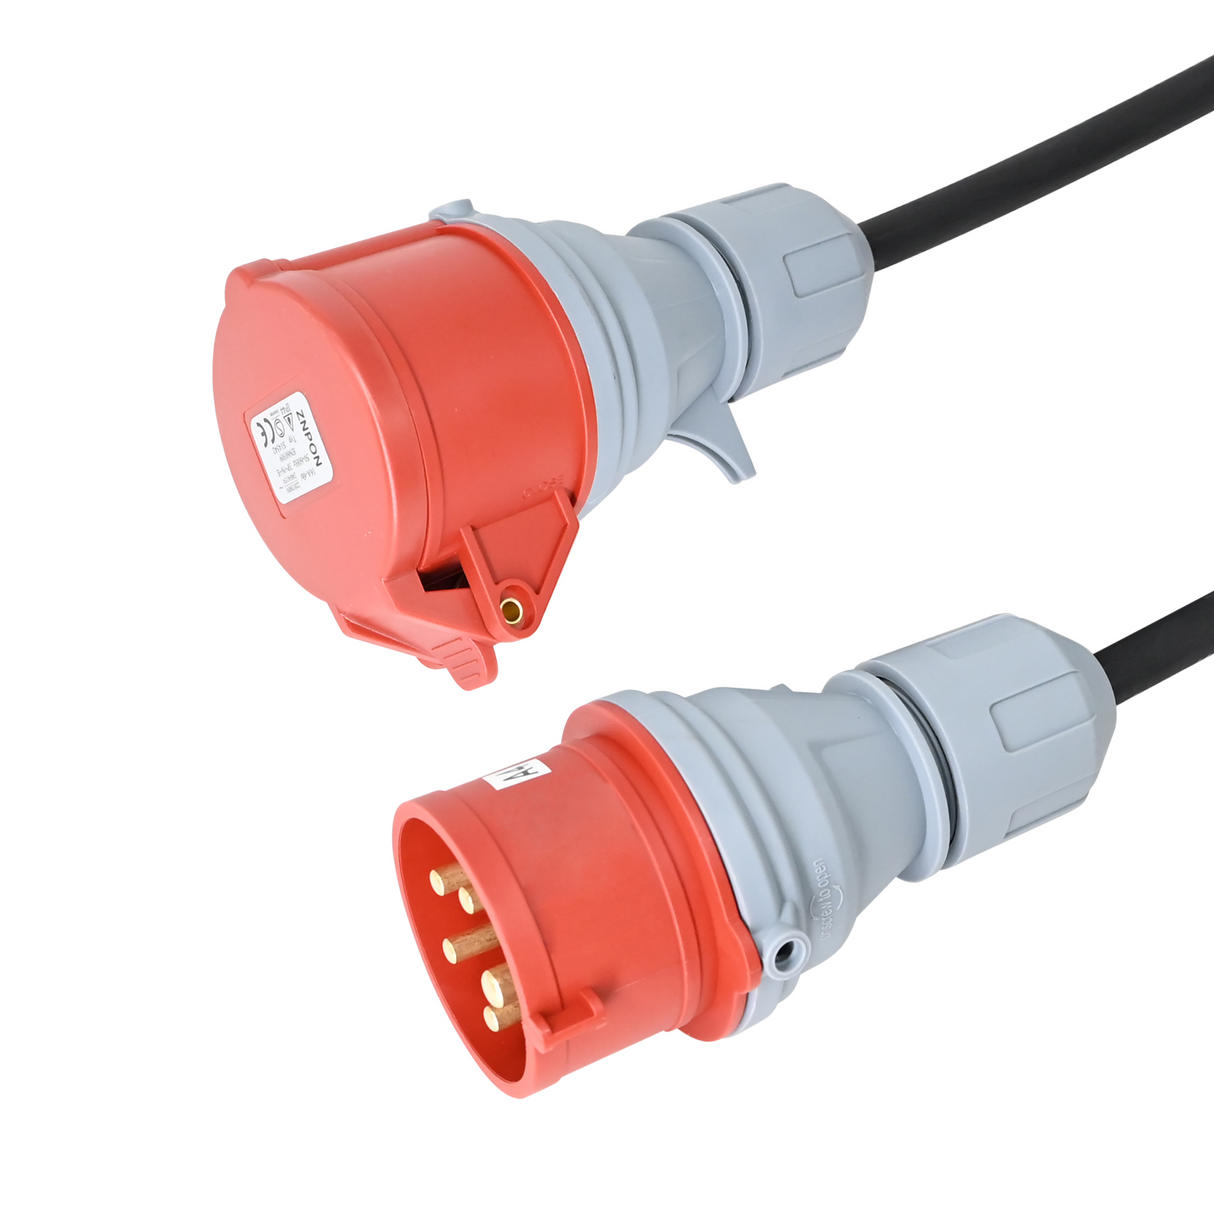 Power current CEE extension cable - Extra thick veins - 3 phase 5*2.5mm 16A